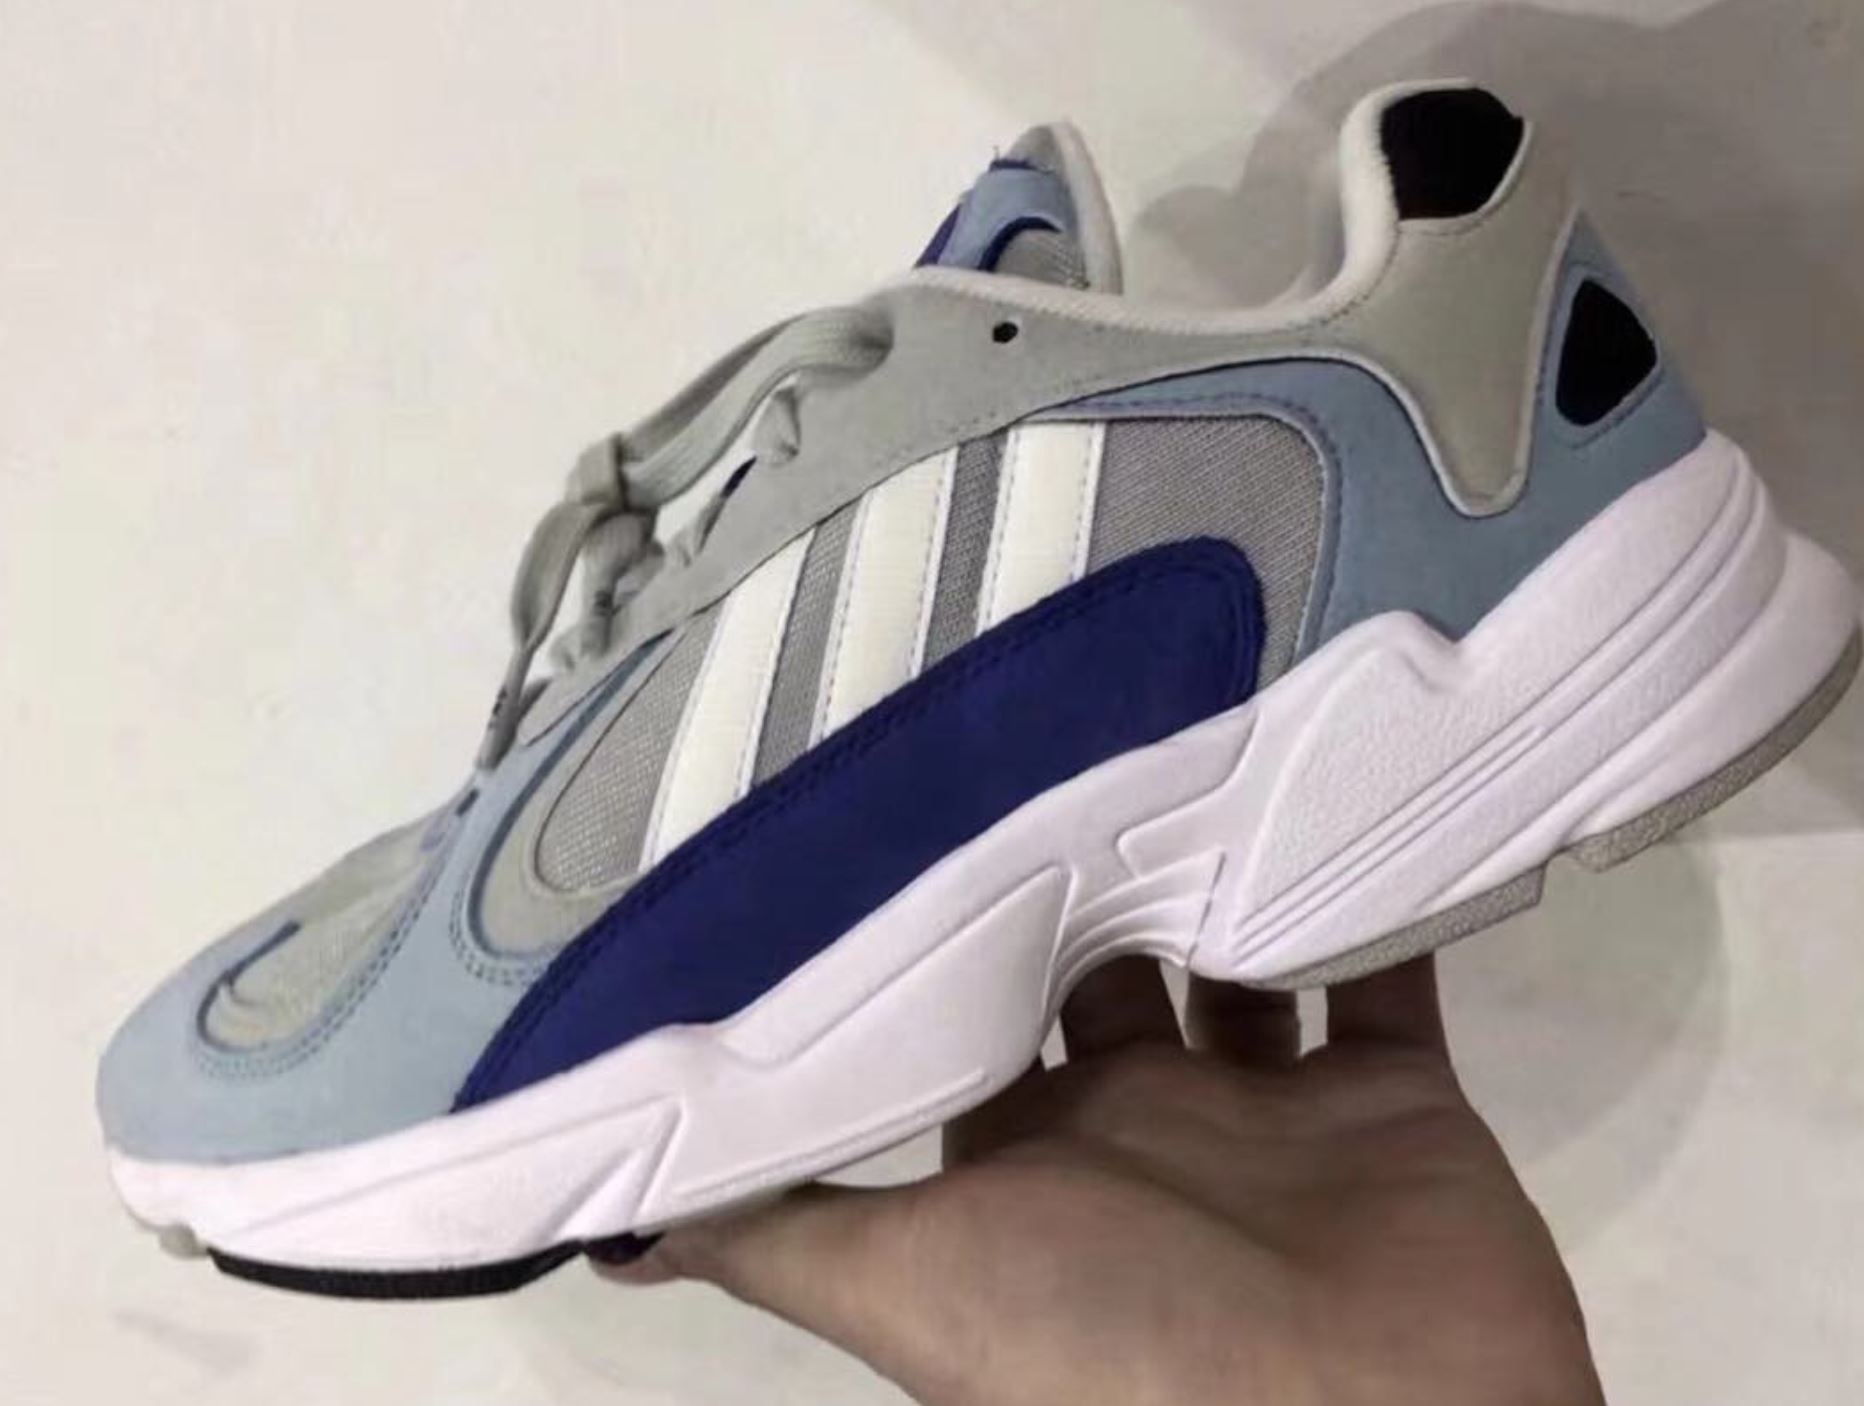 A Premium END x adidas Yung-1 Leaks Online - WearTesters